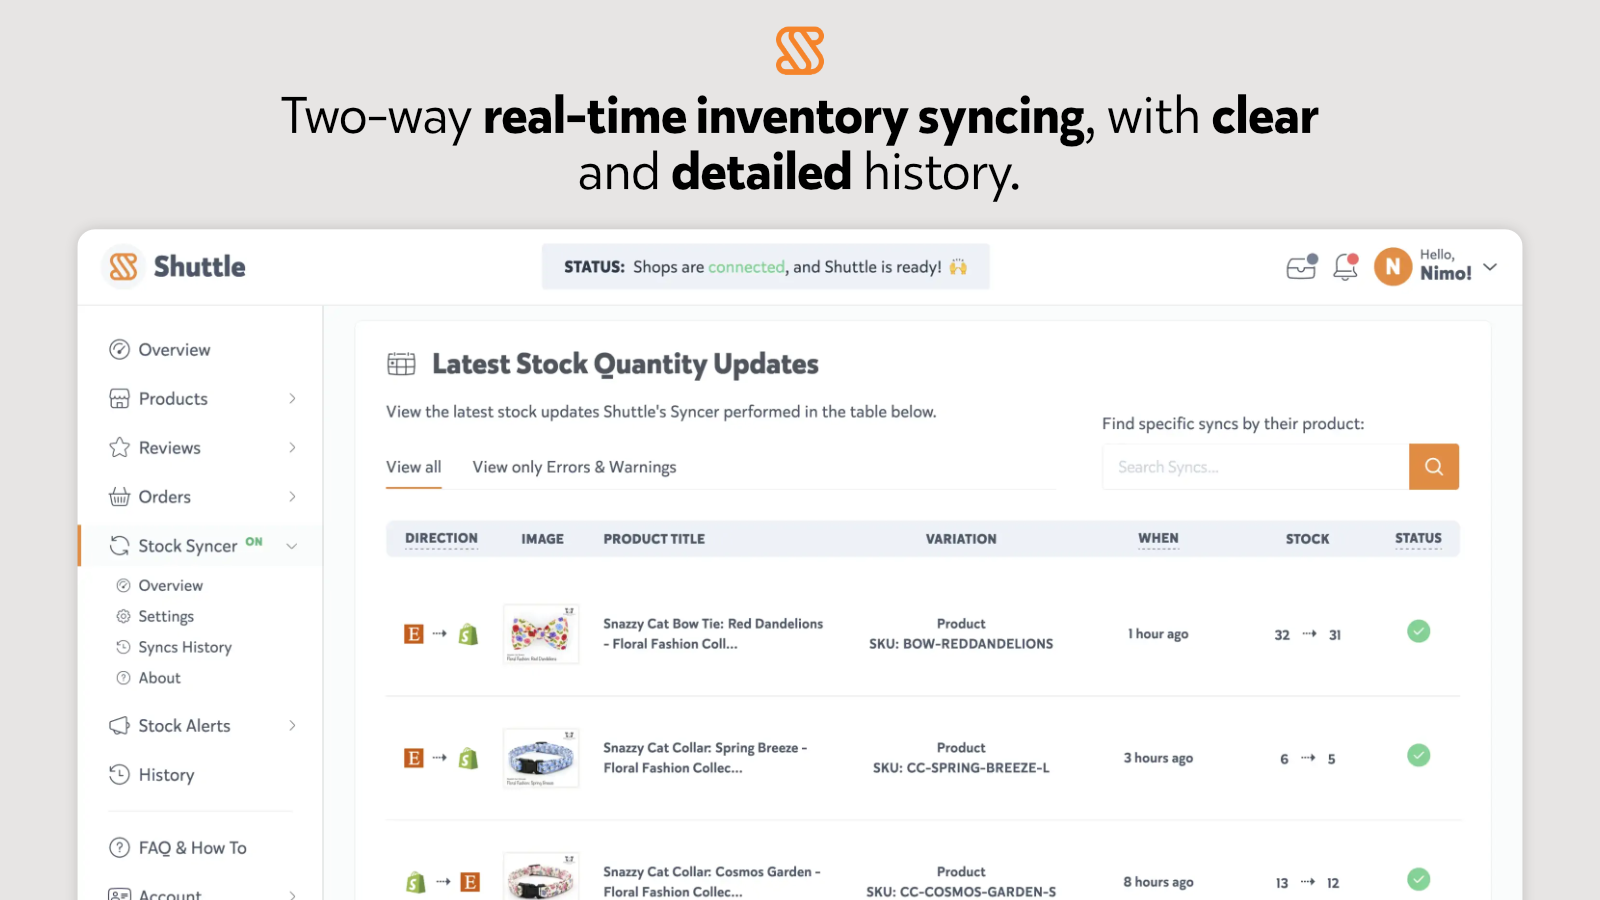 Two-way real-time inventory syncing, with detailed history